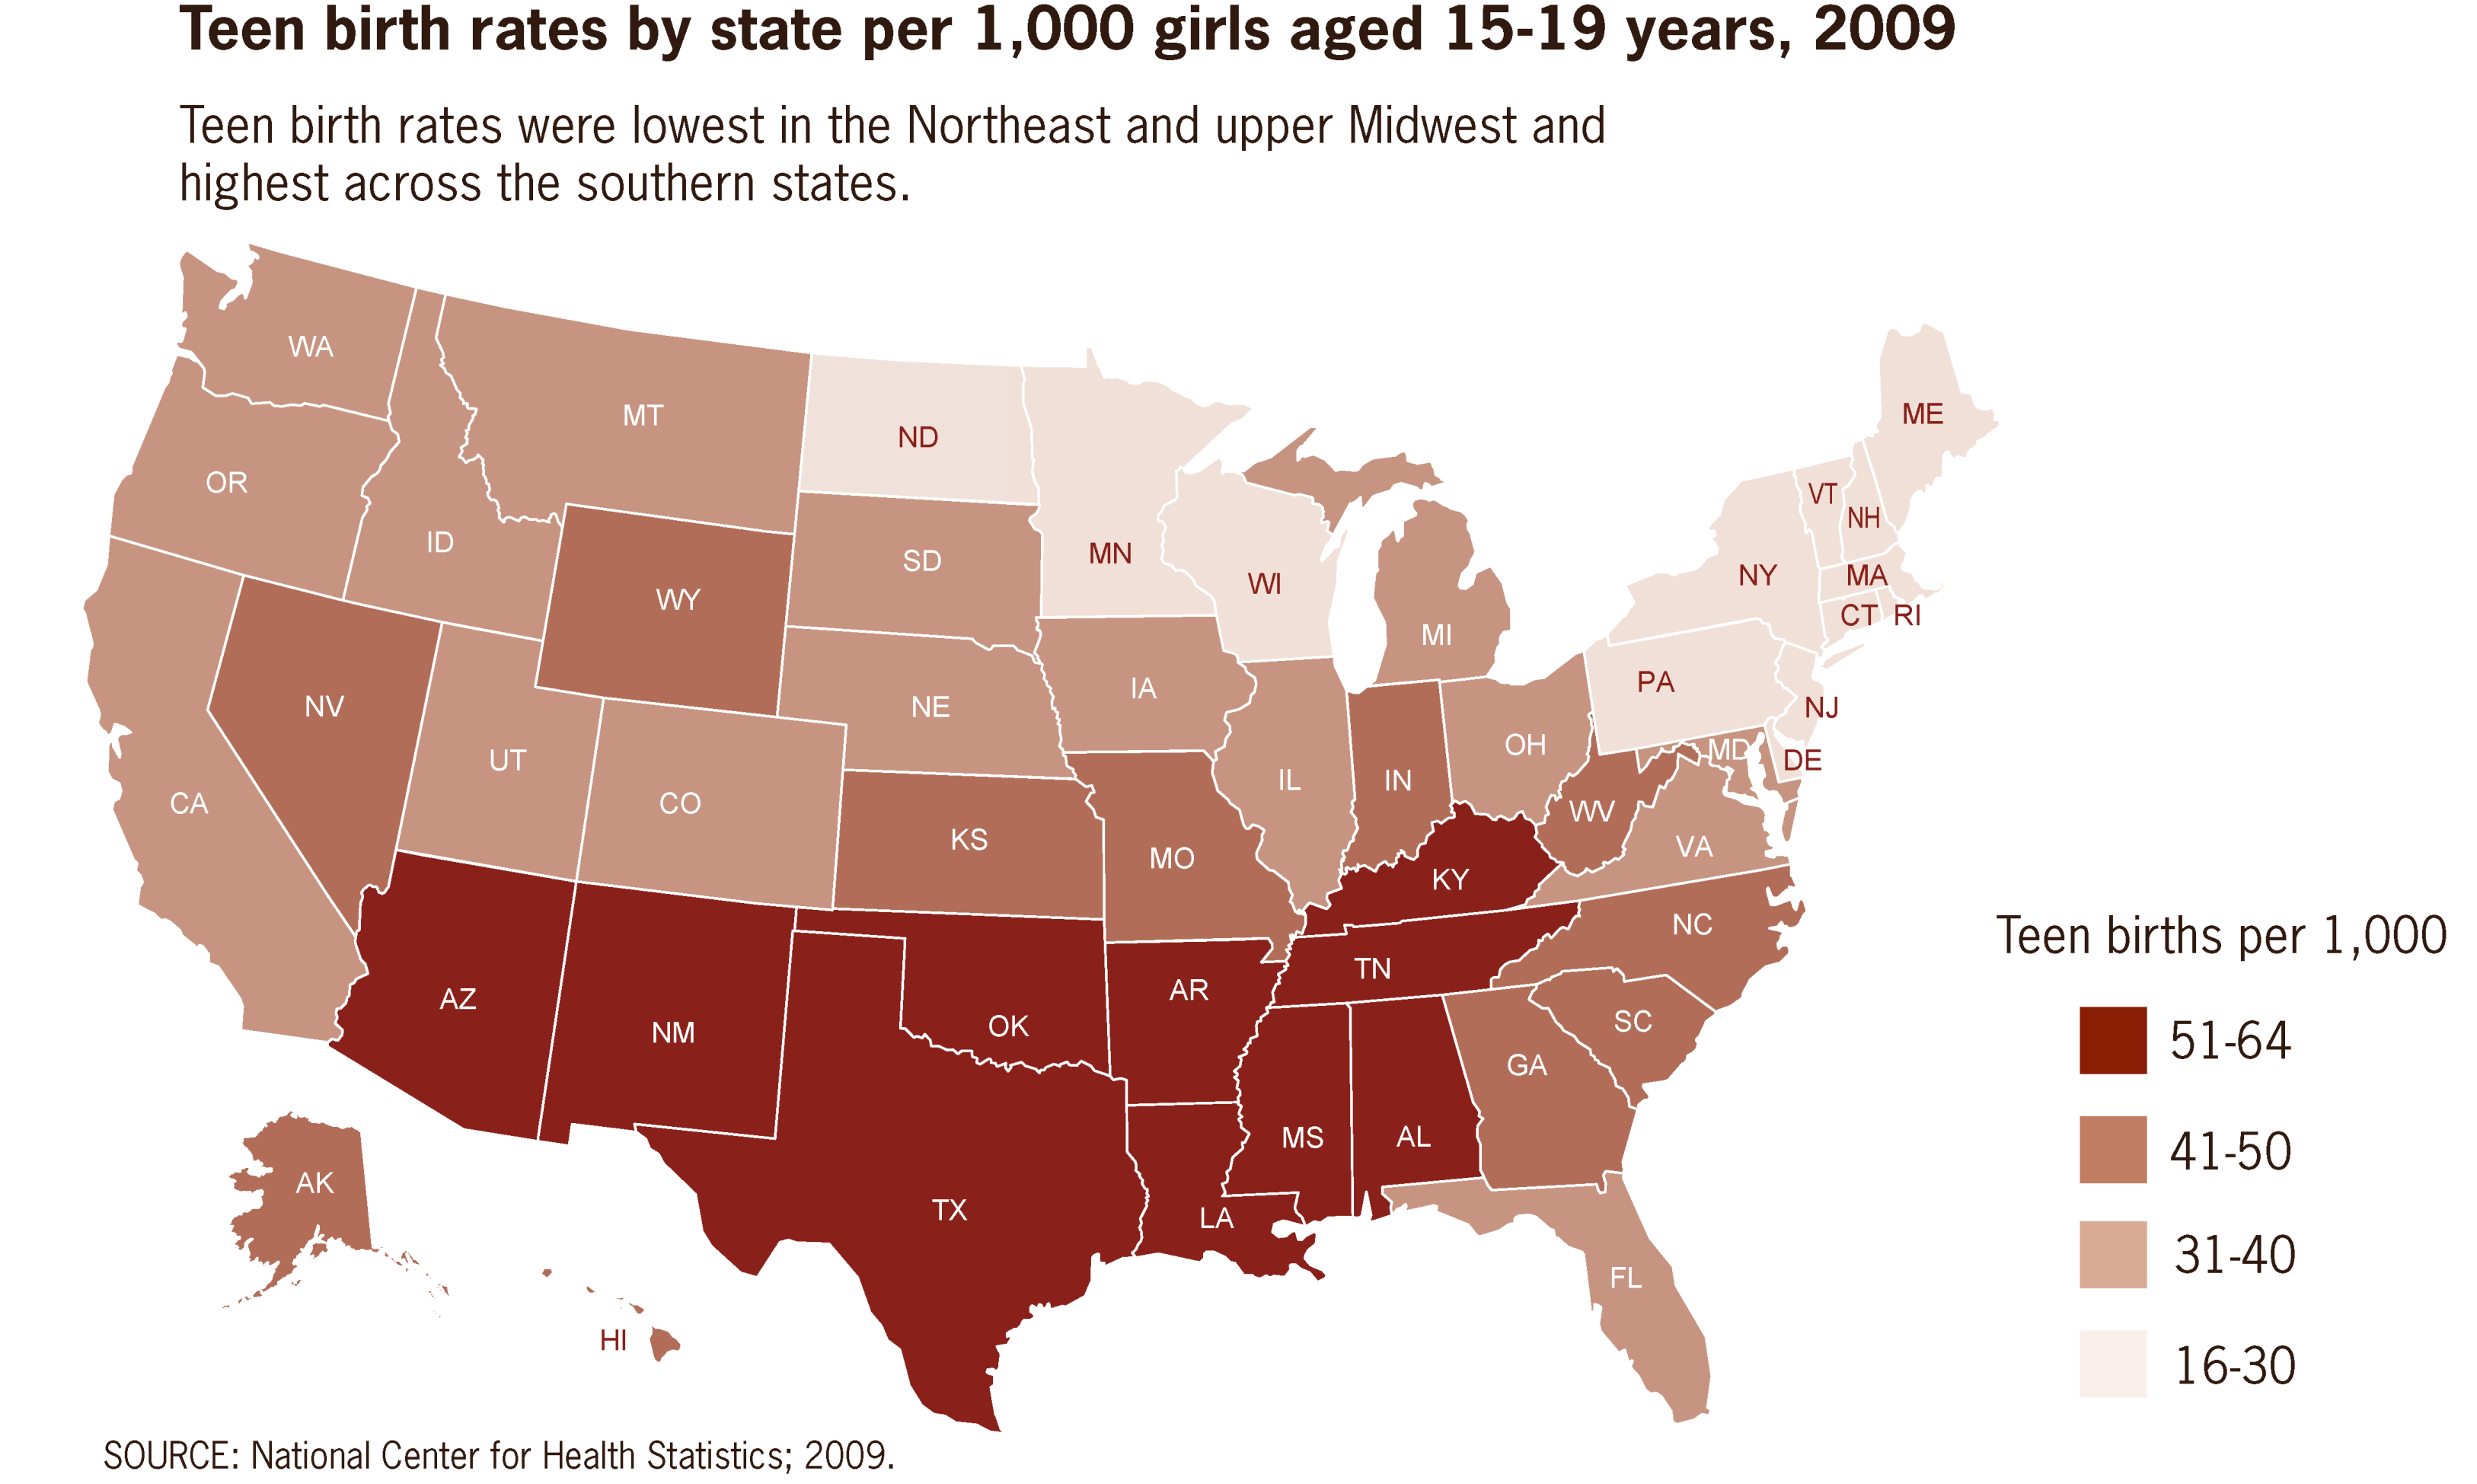 US_teen_birth_rates_by_state_per_1000_girls_aged_15-19_years_2009.png